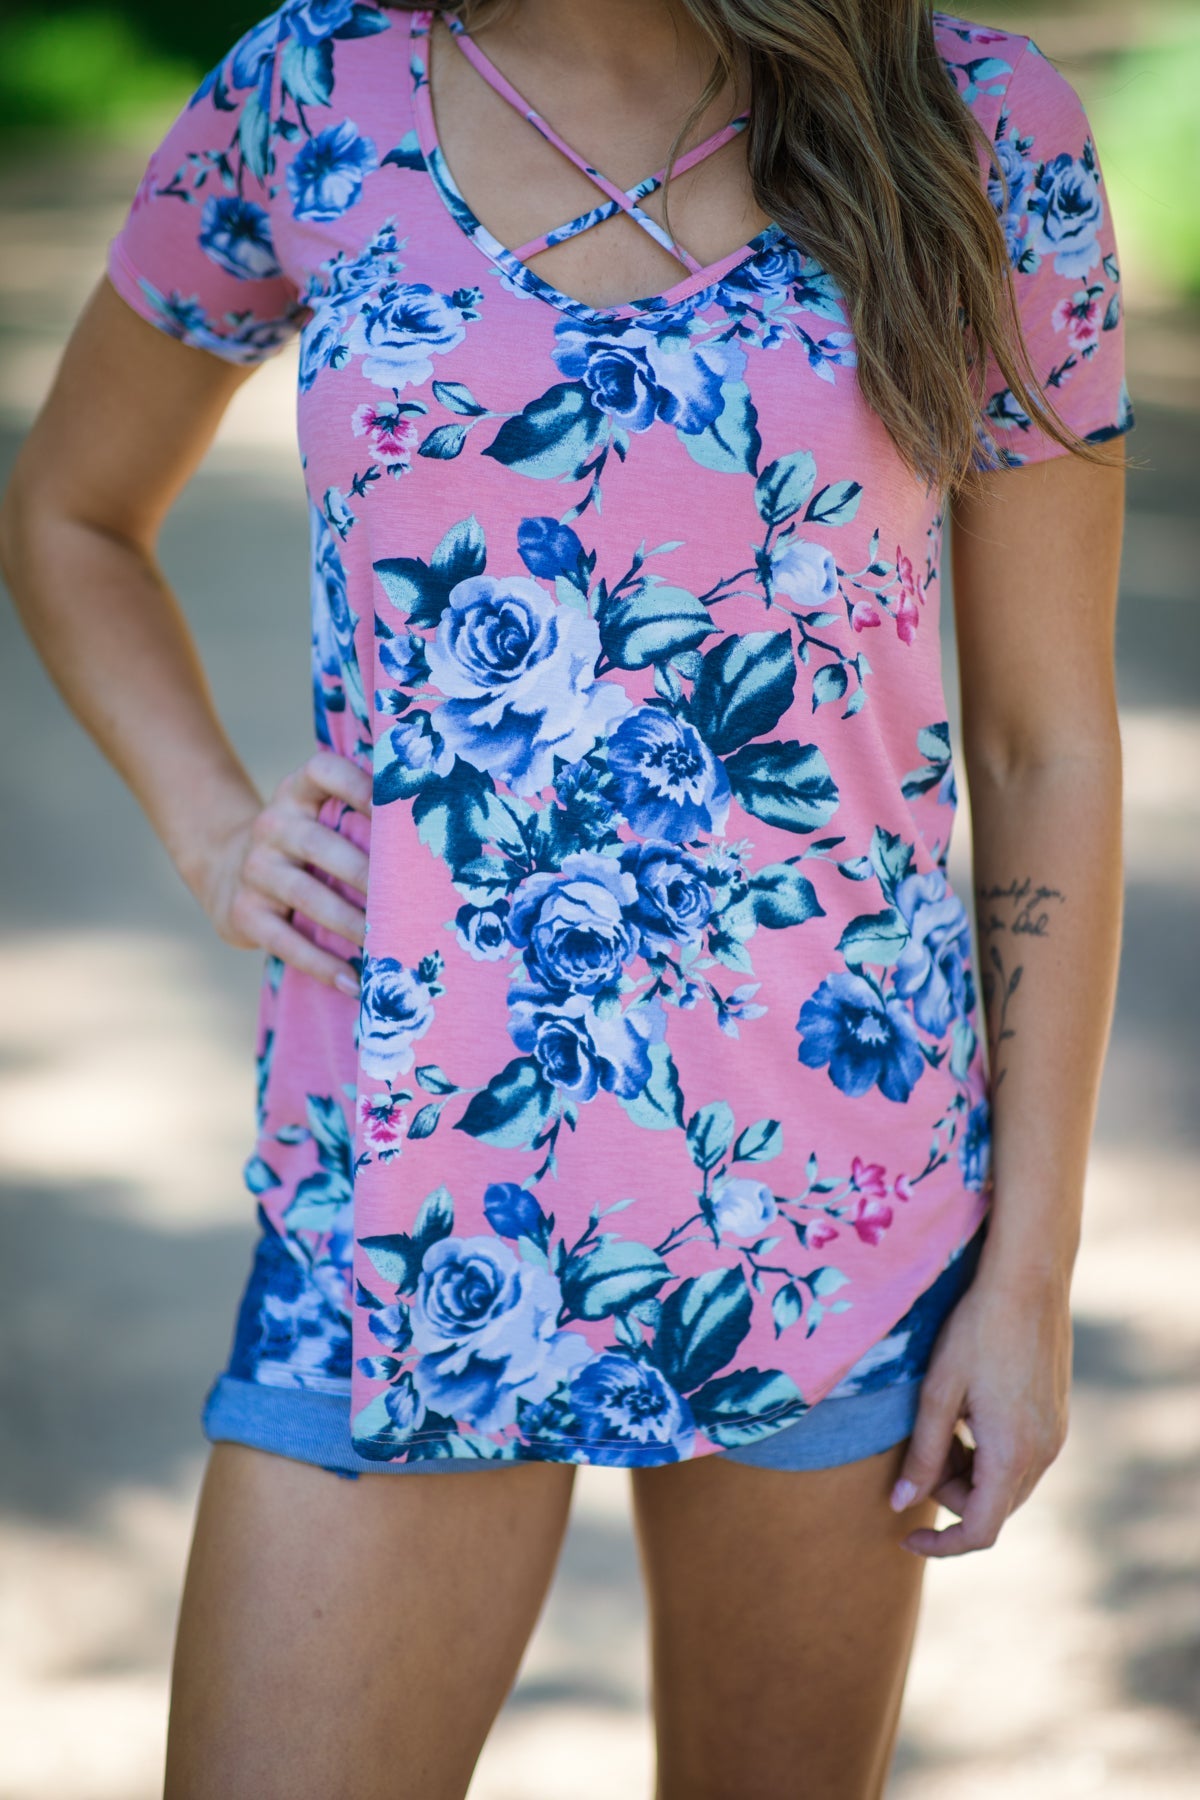 Blush Multicolor Floral Criss-Cross Floral Top - Filly Flair